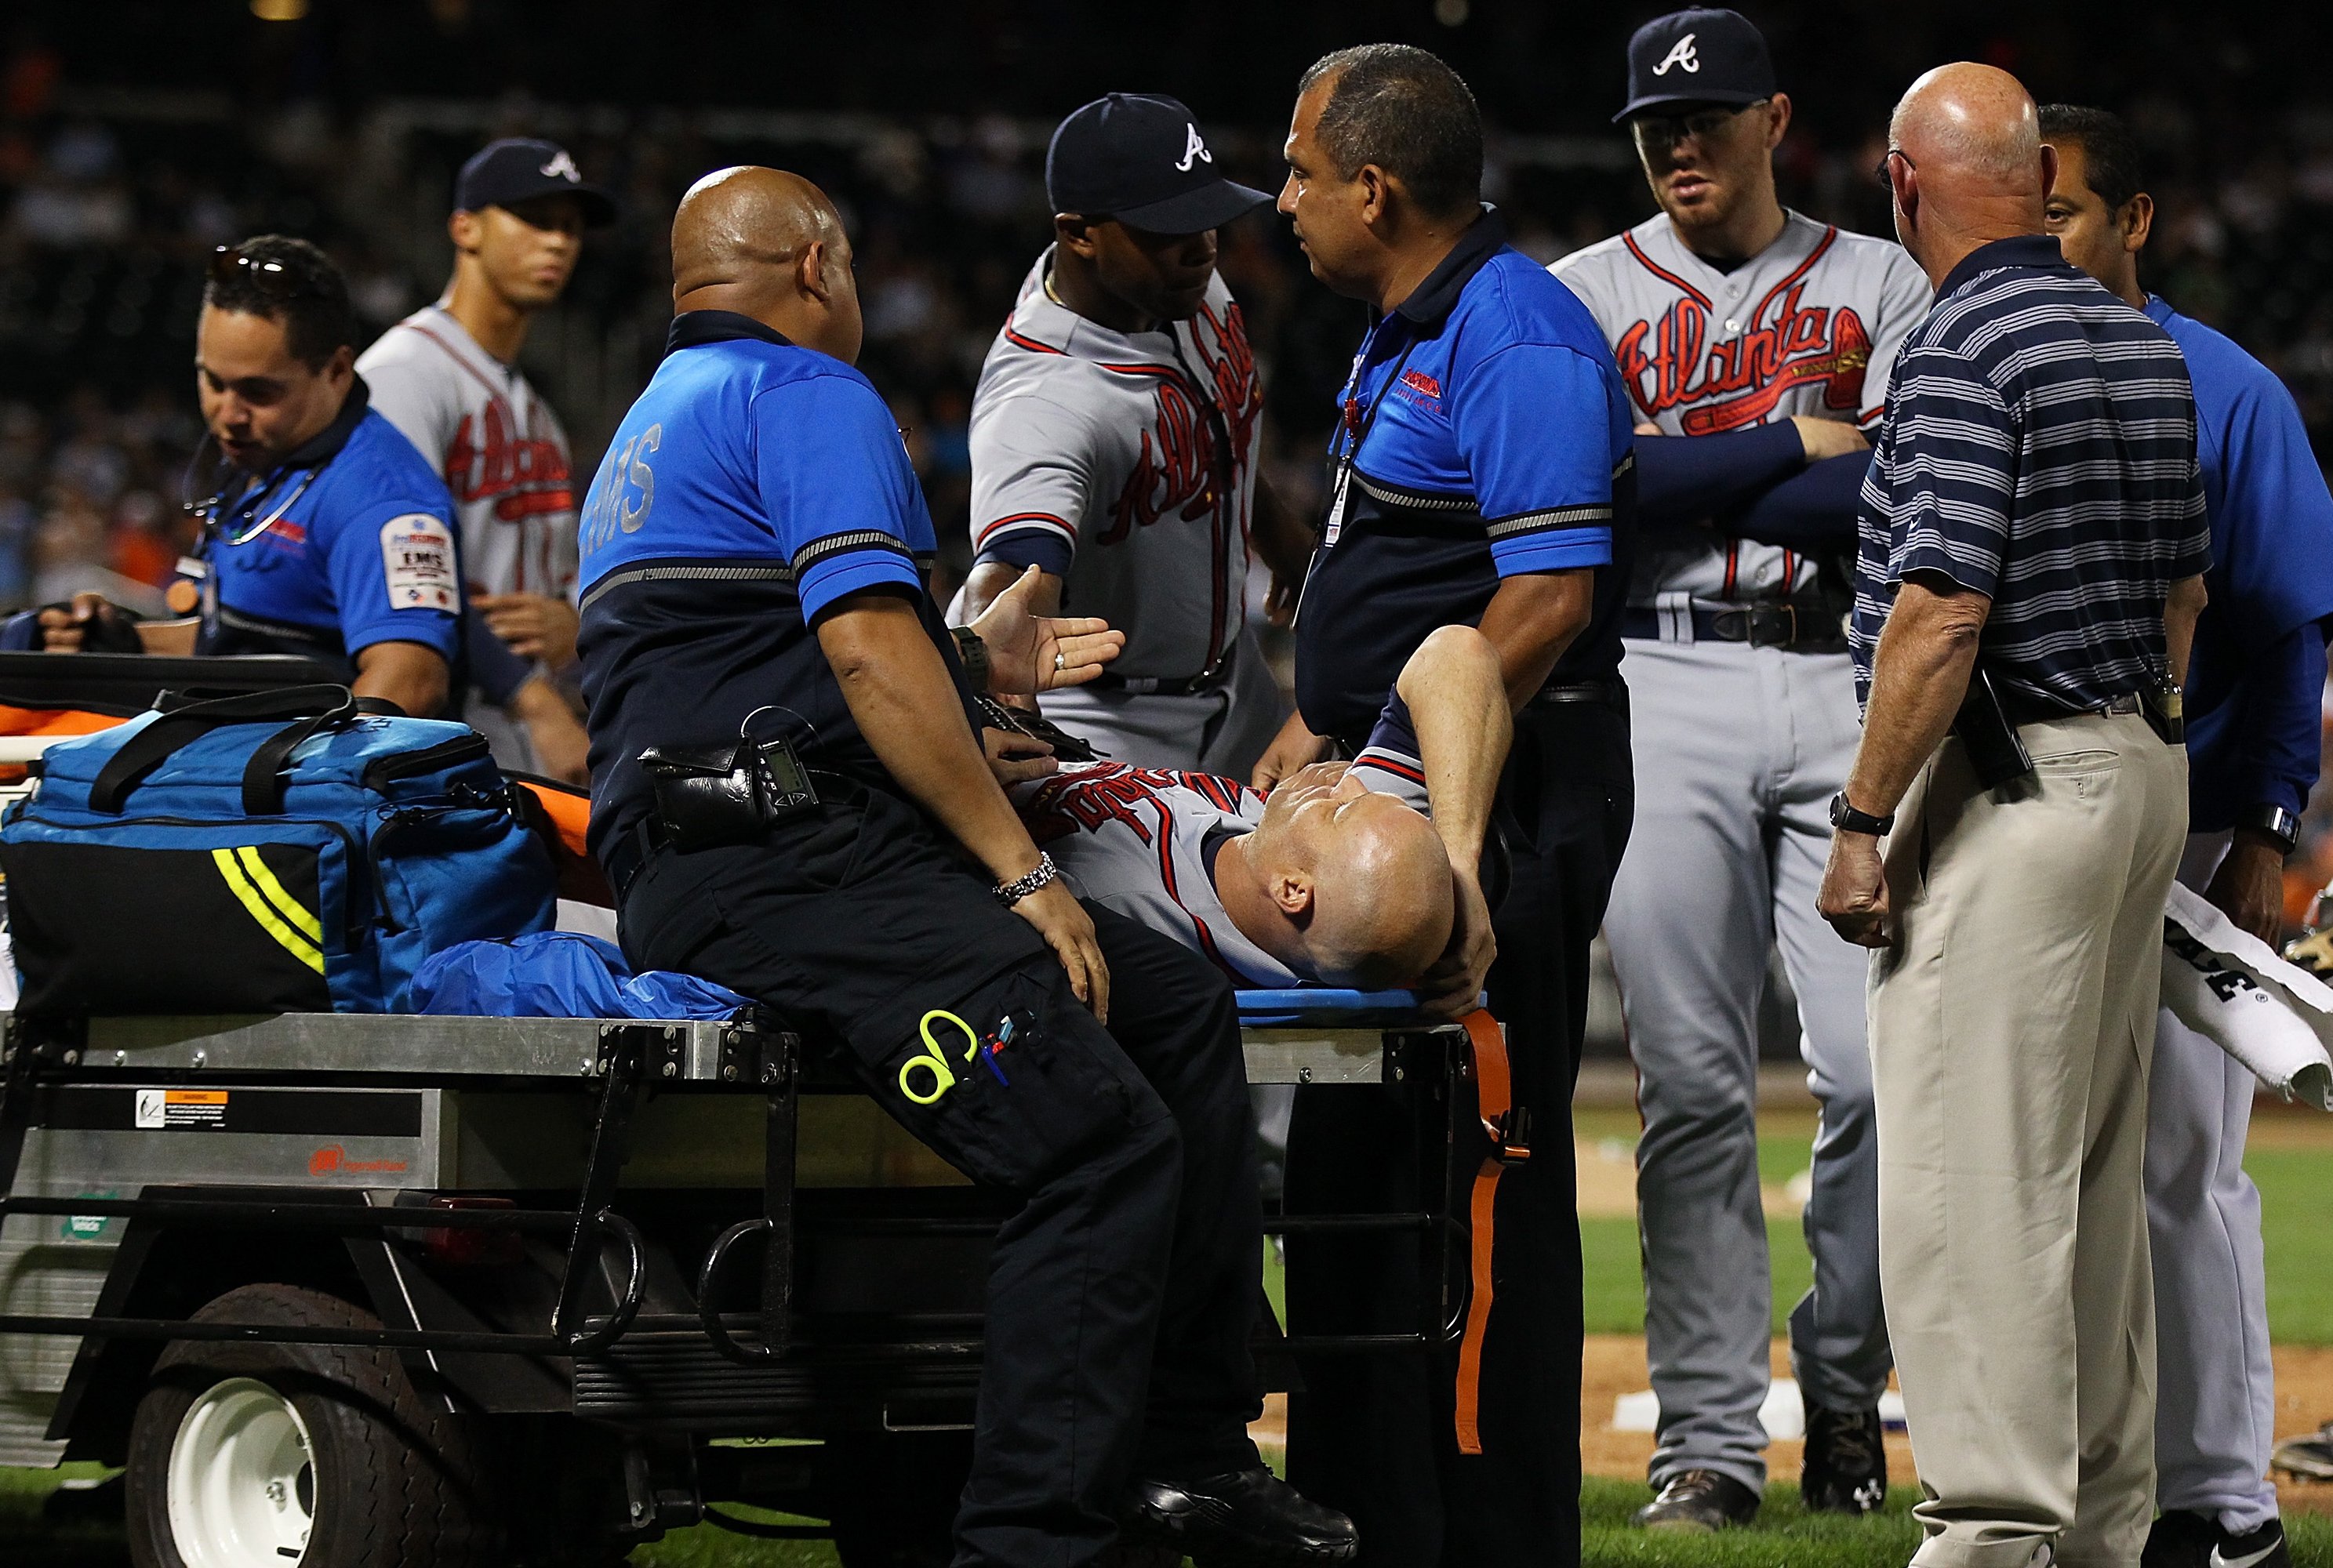 Tim Hudson suffers ankle injury, gets carted off